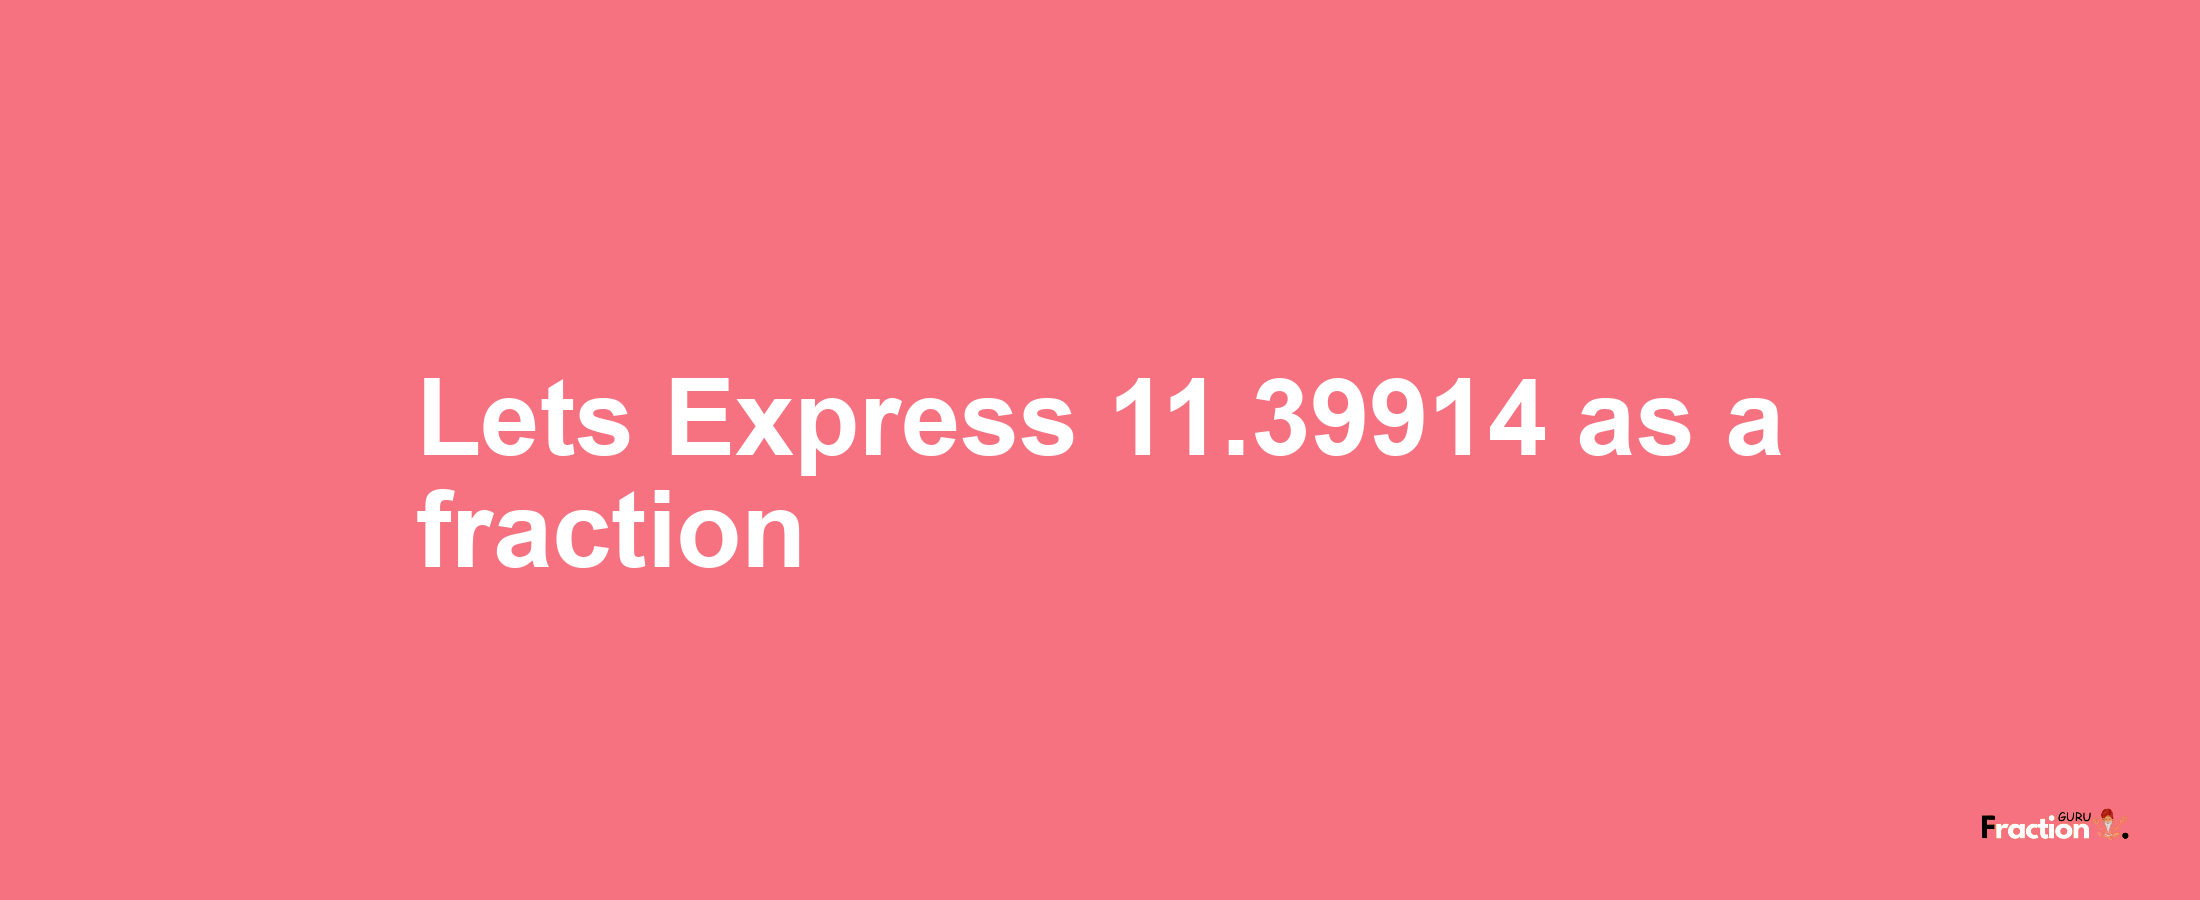 Lets Express 11.39914 as afraction